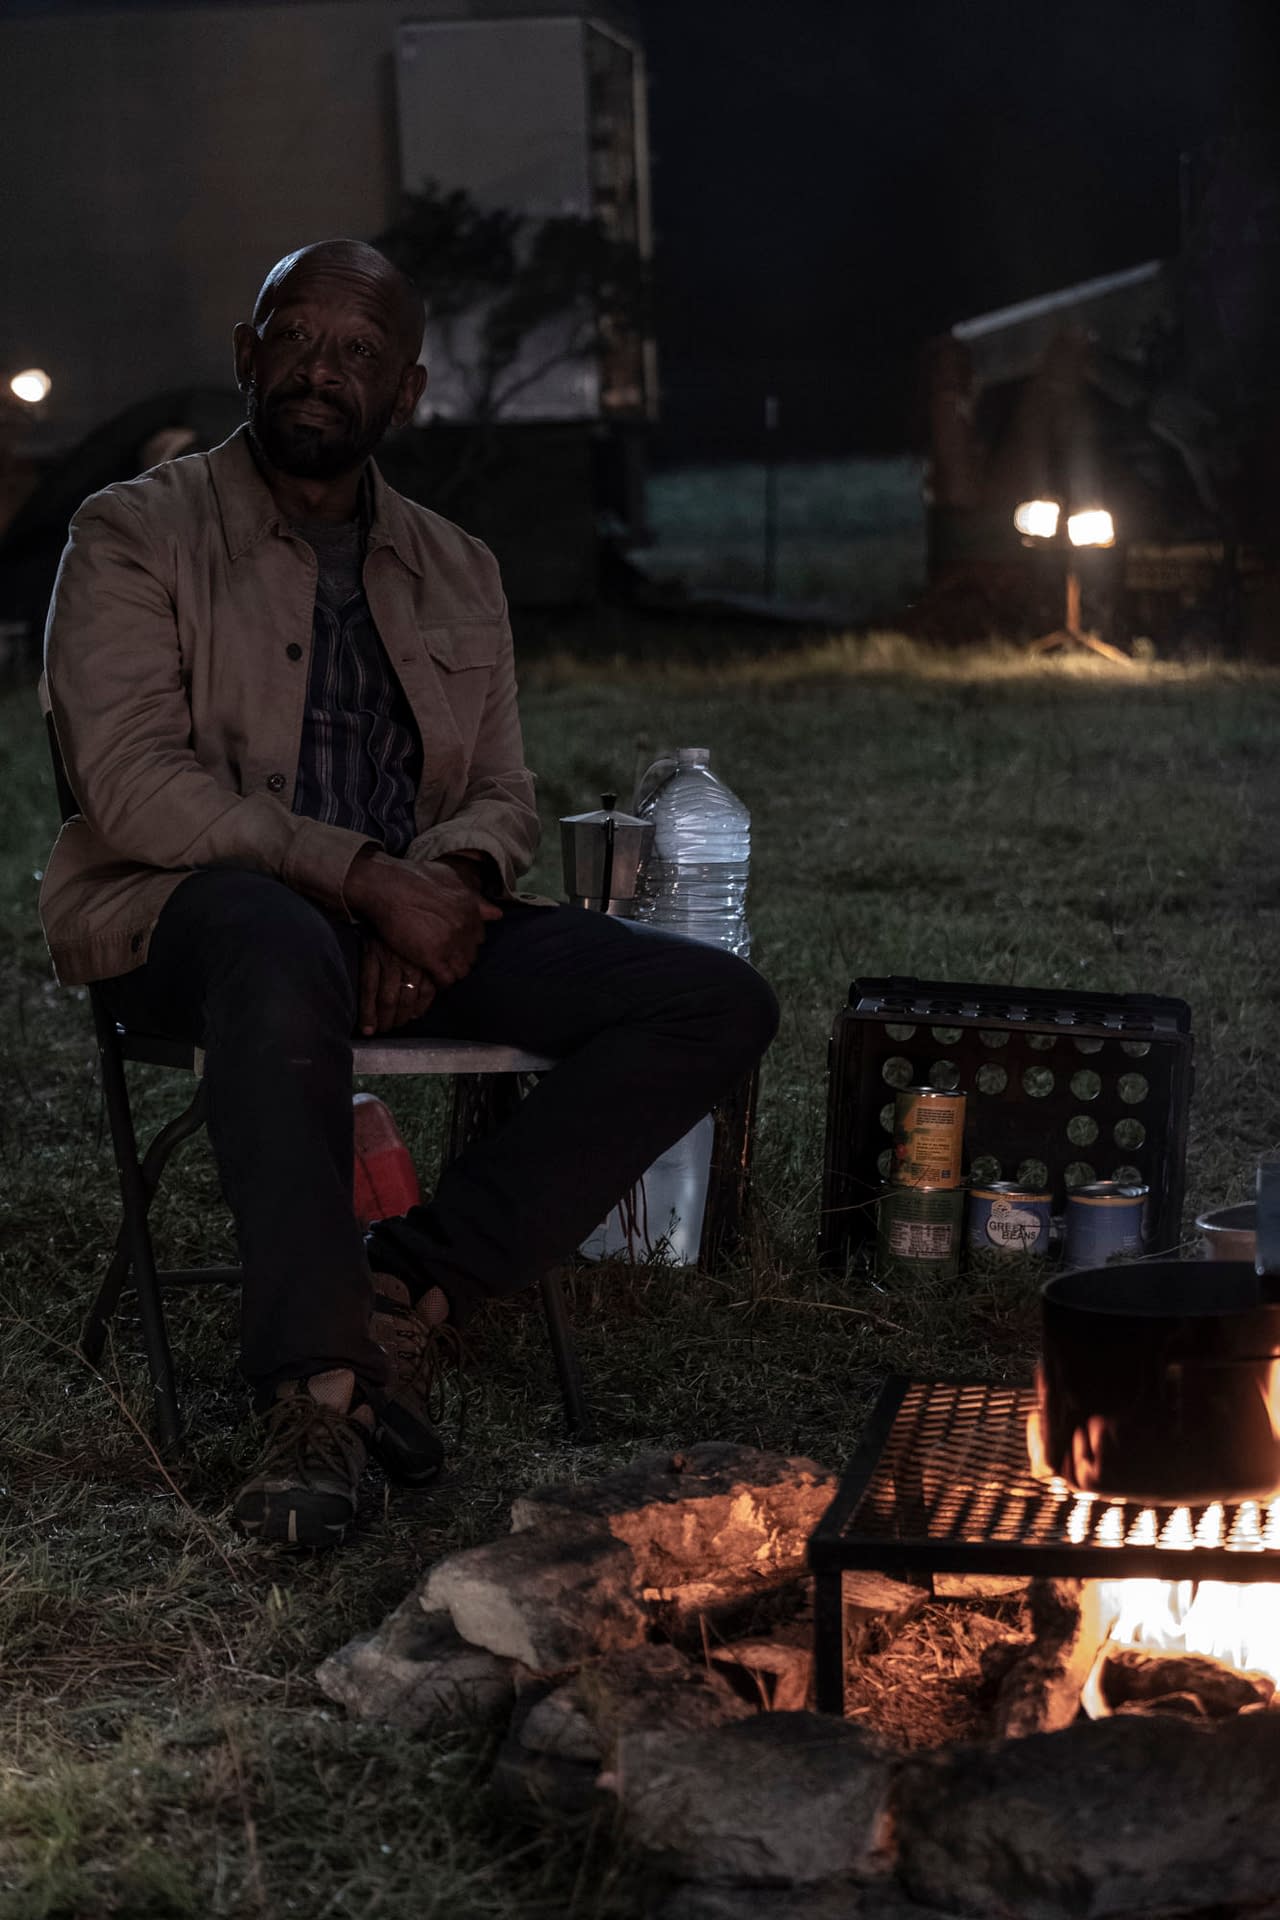 "Fear the Walking Dead" Season 5, Episode 15 "Channel 5": Will Ginny's Way Be Our Heroes' Only Way? [PREVIEW]